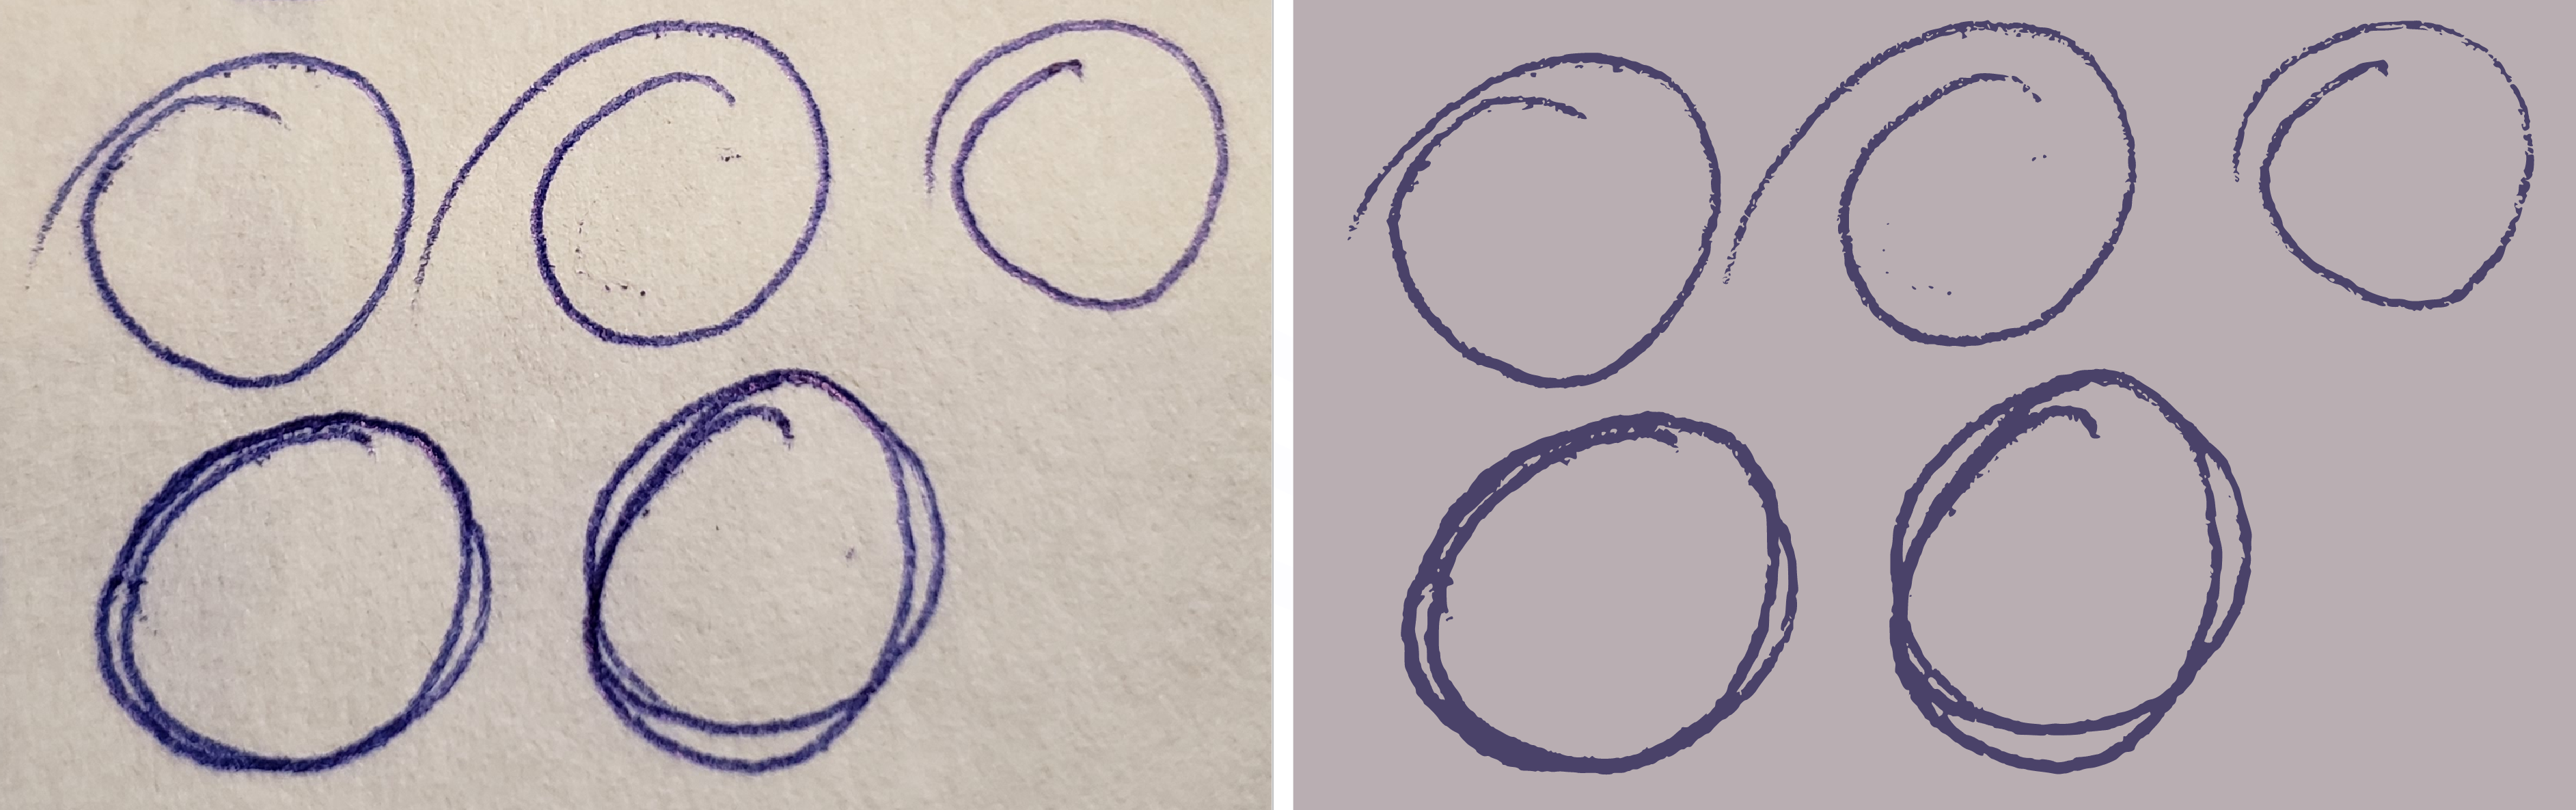 A side by side comparison of a photo and its vectorized results showing a few circle doodle